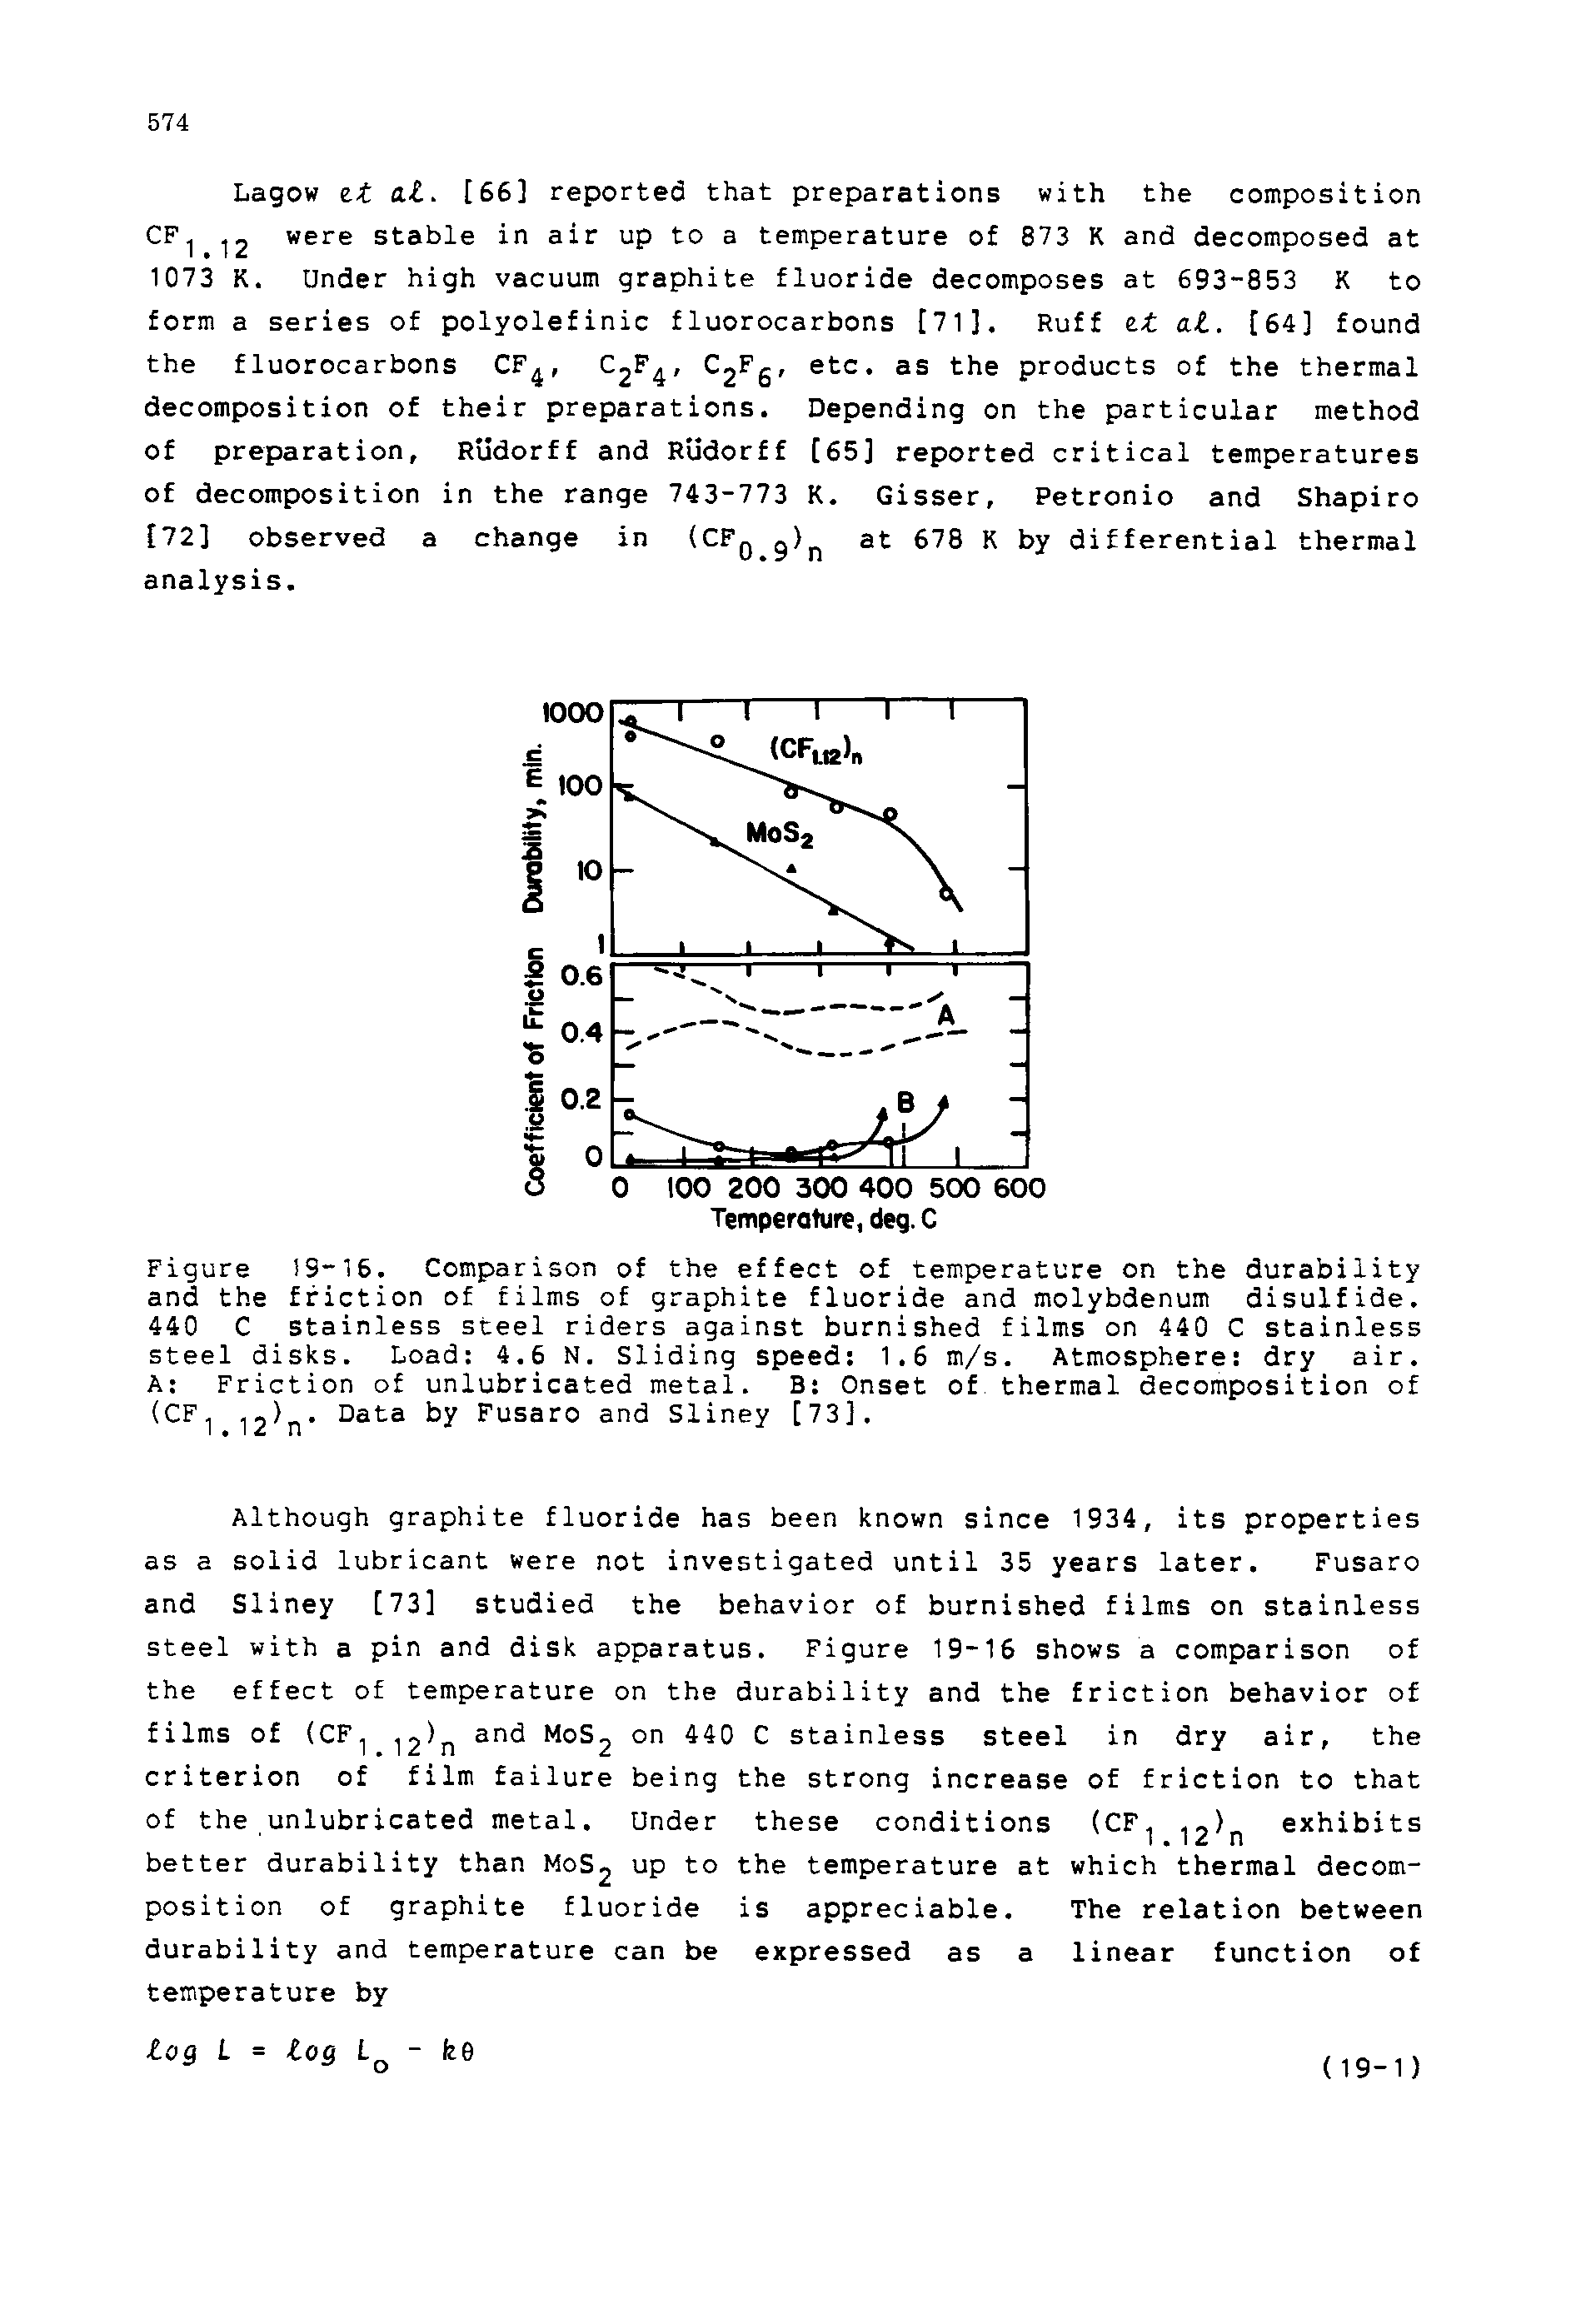 Figure 19-16. Comparison of the effect of temperature on the durability and the friction of films of graphite fluoride and molybdenum disulfide. 440 C stainless steel riders against burnished films on 440 C stainless steel disks. Load 4.6 N. Sliding speed 1.6 m/s. Atmosphere dry air. A Friction of unlubricated metal. B Onset of thermal decomposition of (CF 12 n Fusaro and Sliney [73].